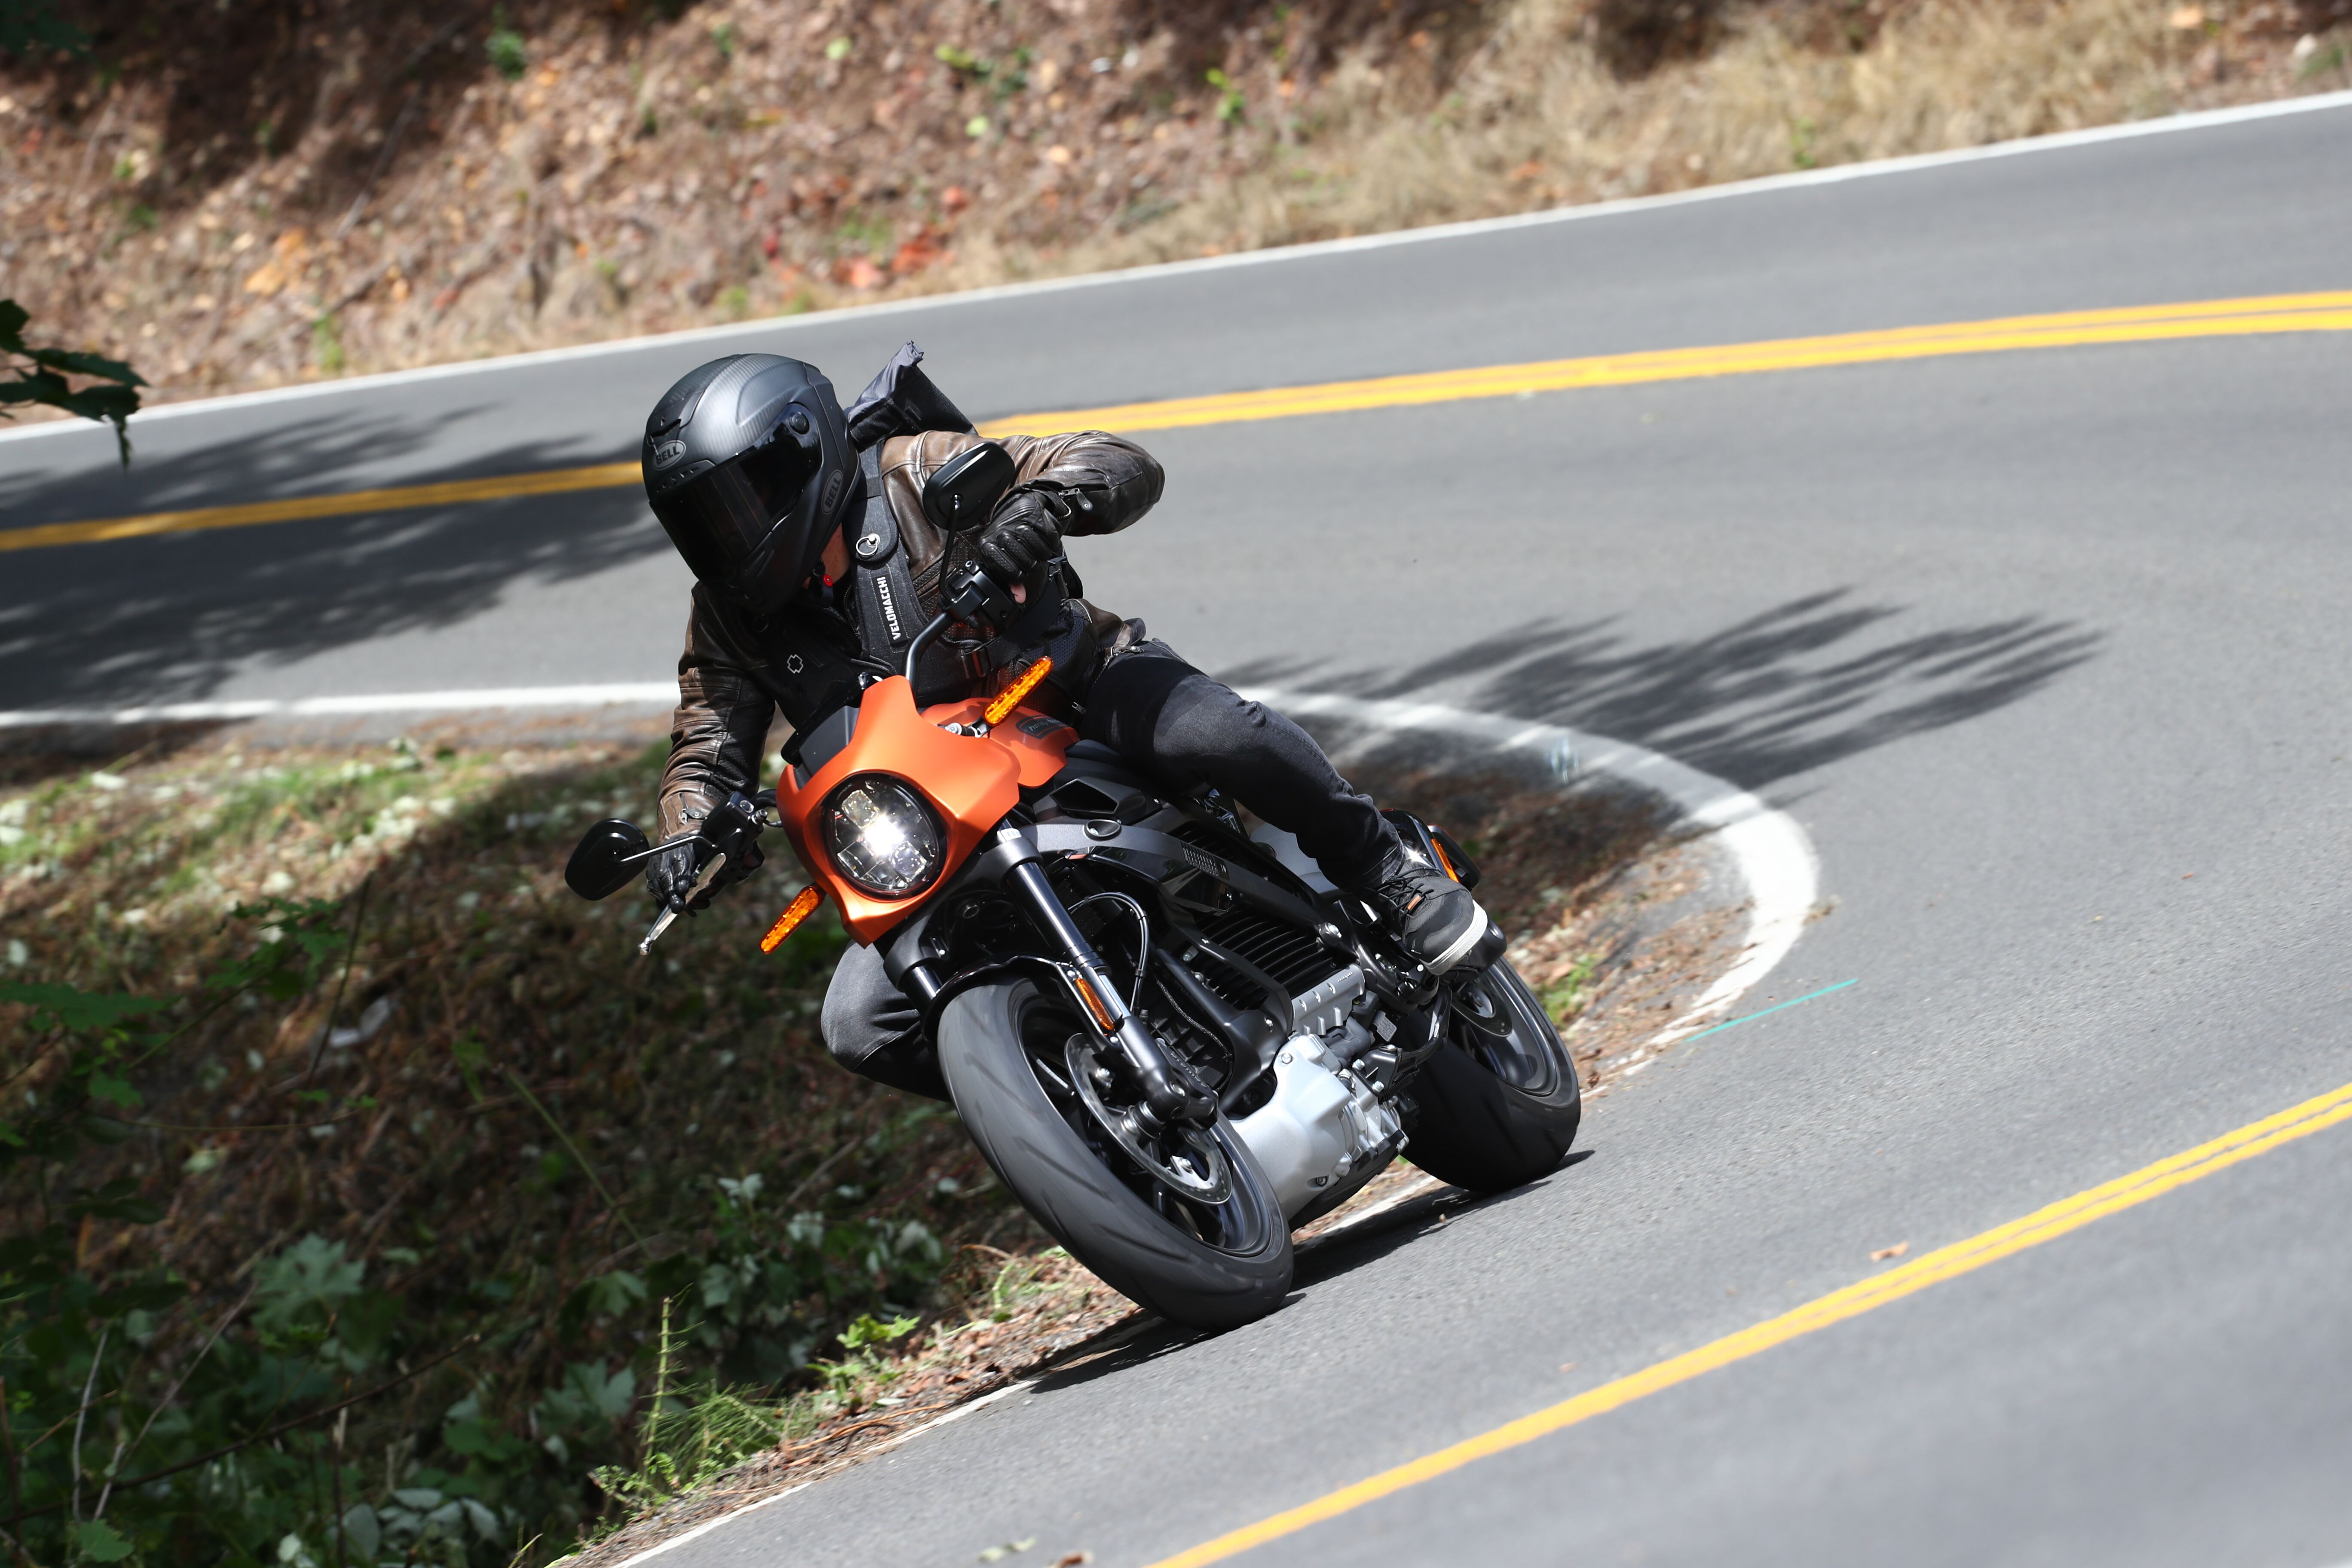 Review: Is the Harley-Davidson LiveWire an Electric Motorcycle Game Changer?